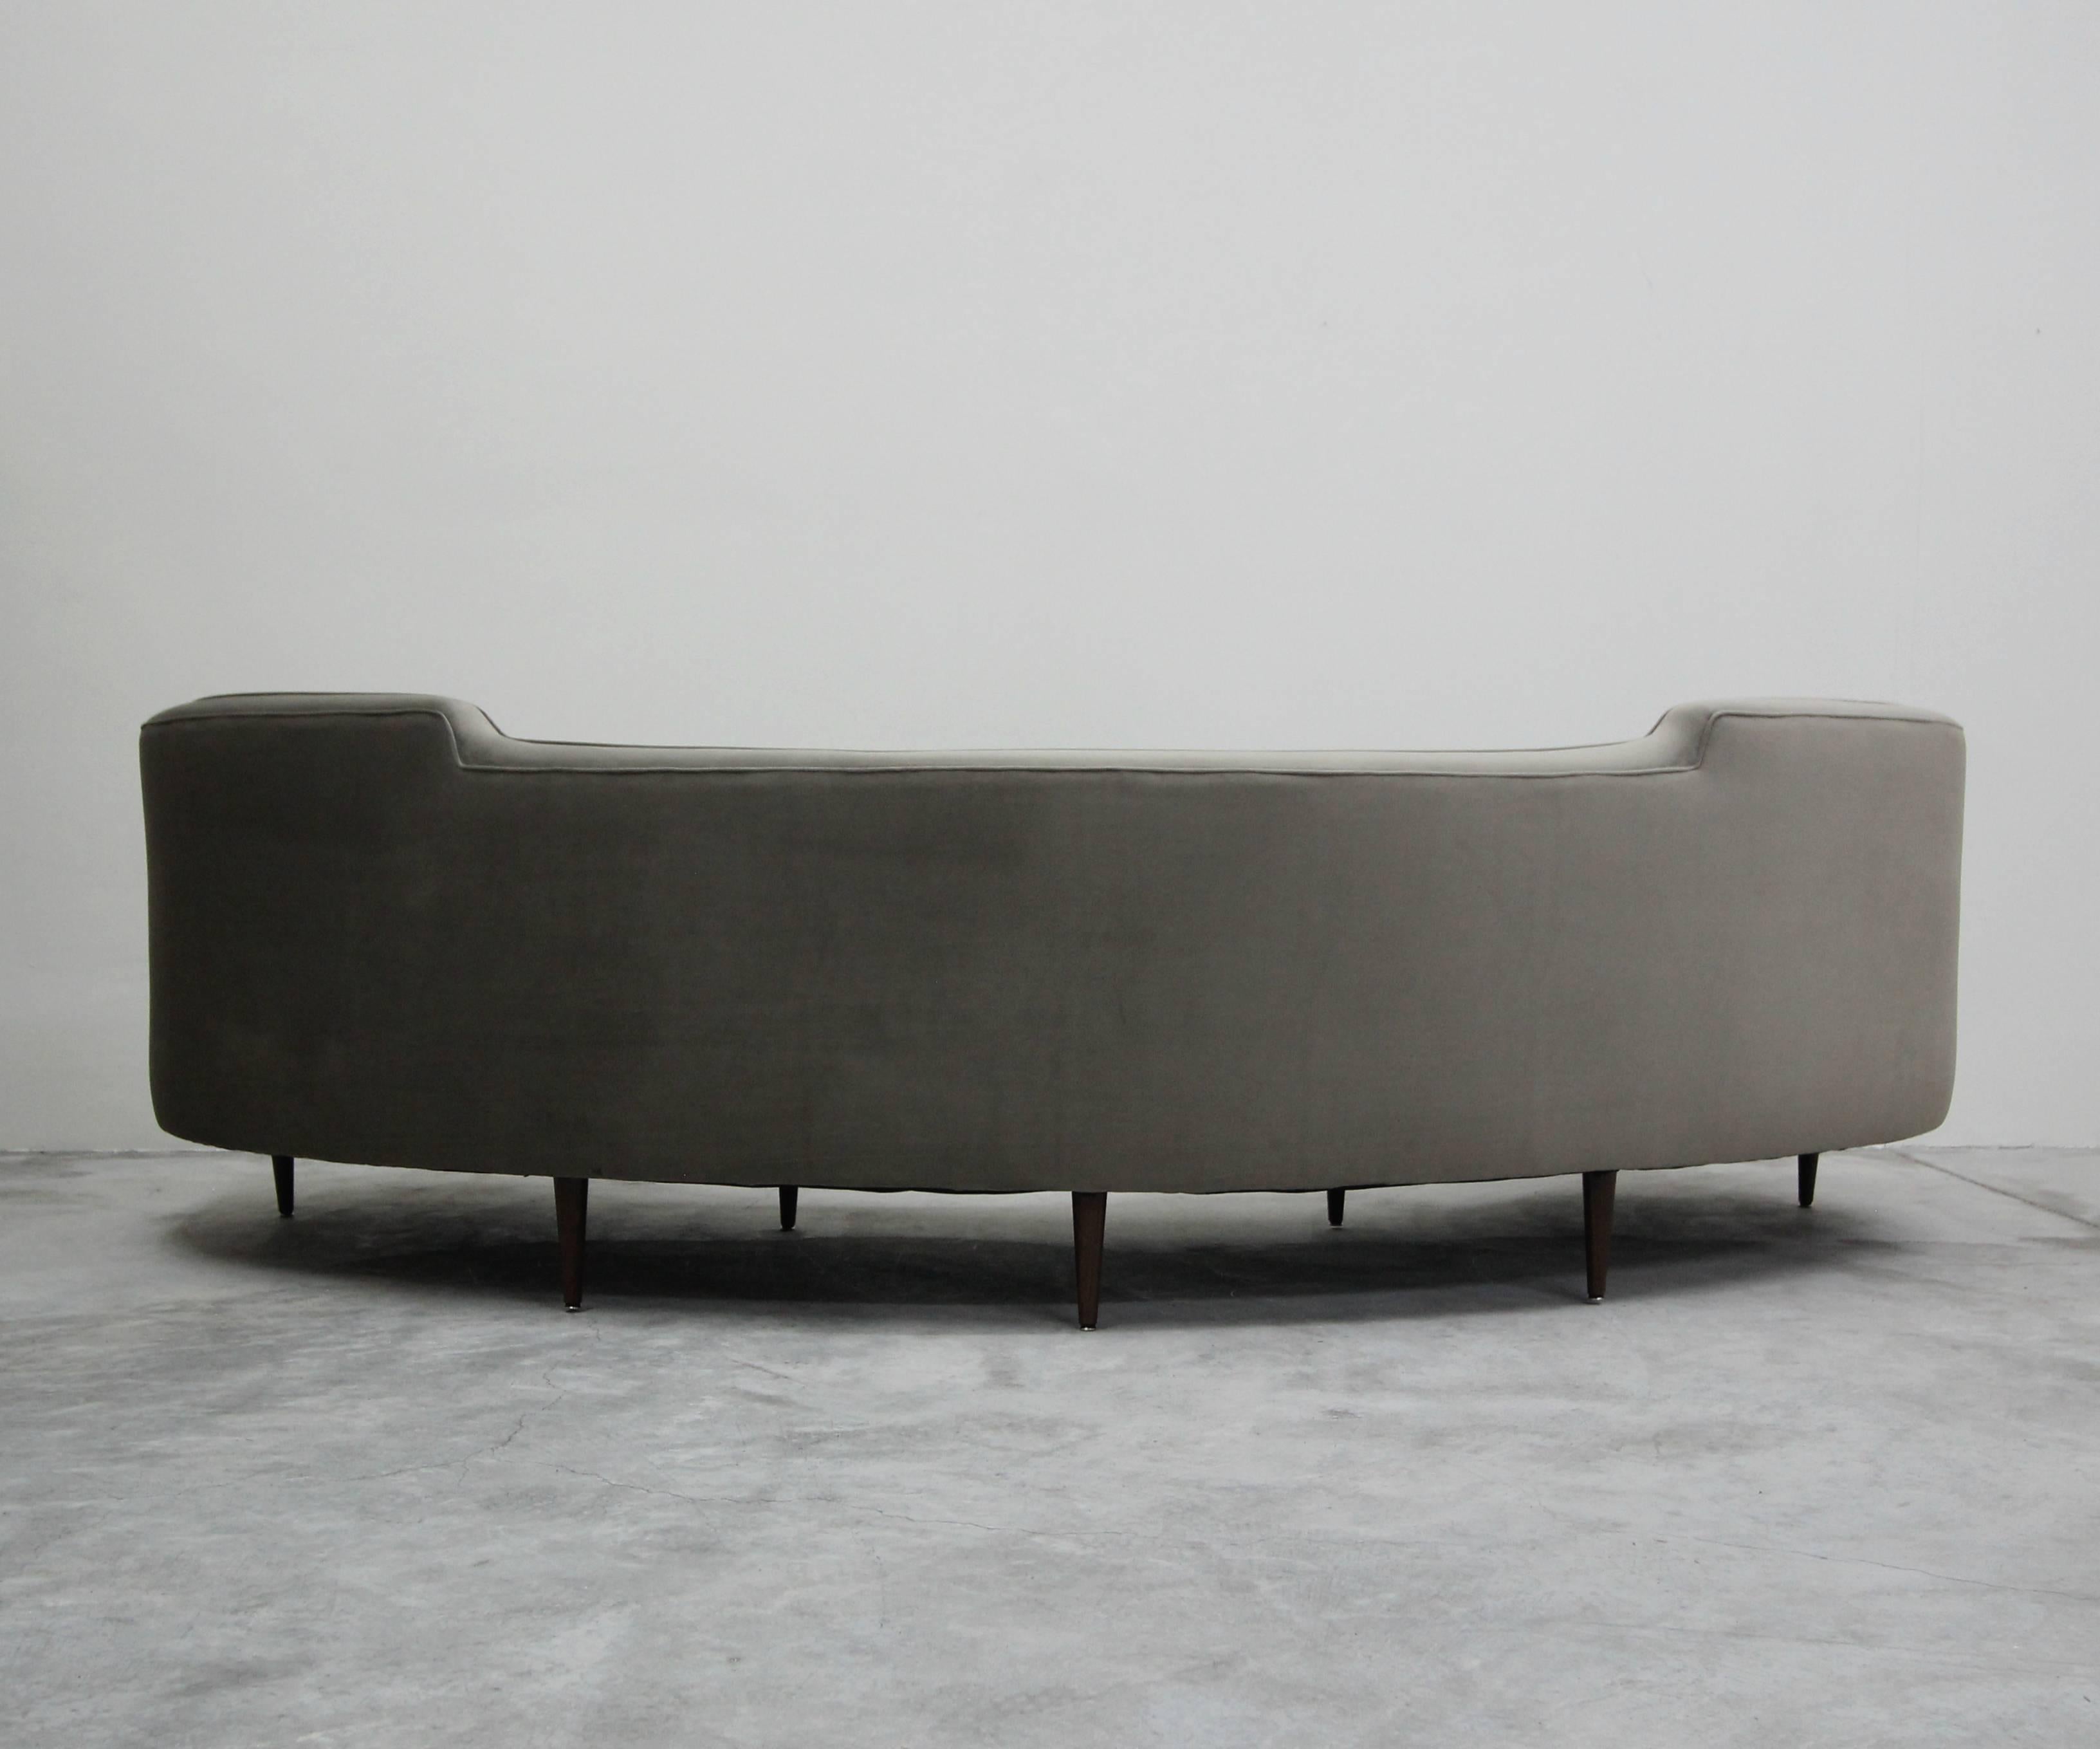 20th Century Authentic Early Midcentury Oasis Sofa by Edward Wormley for Dunbar